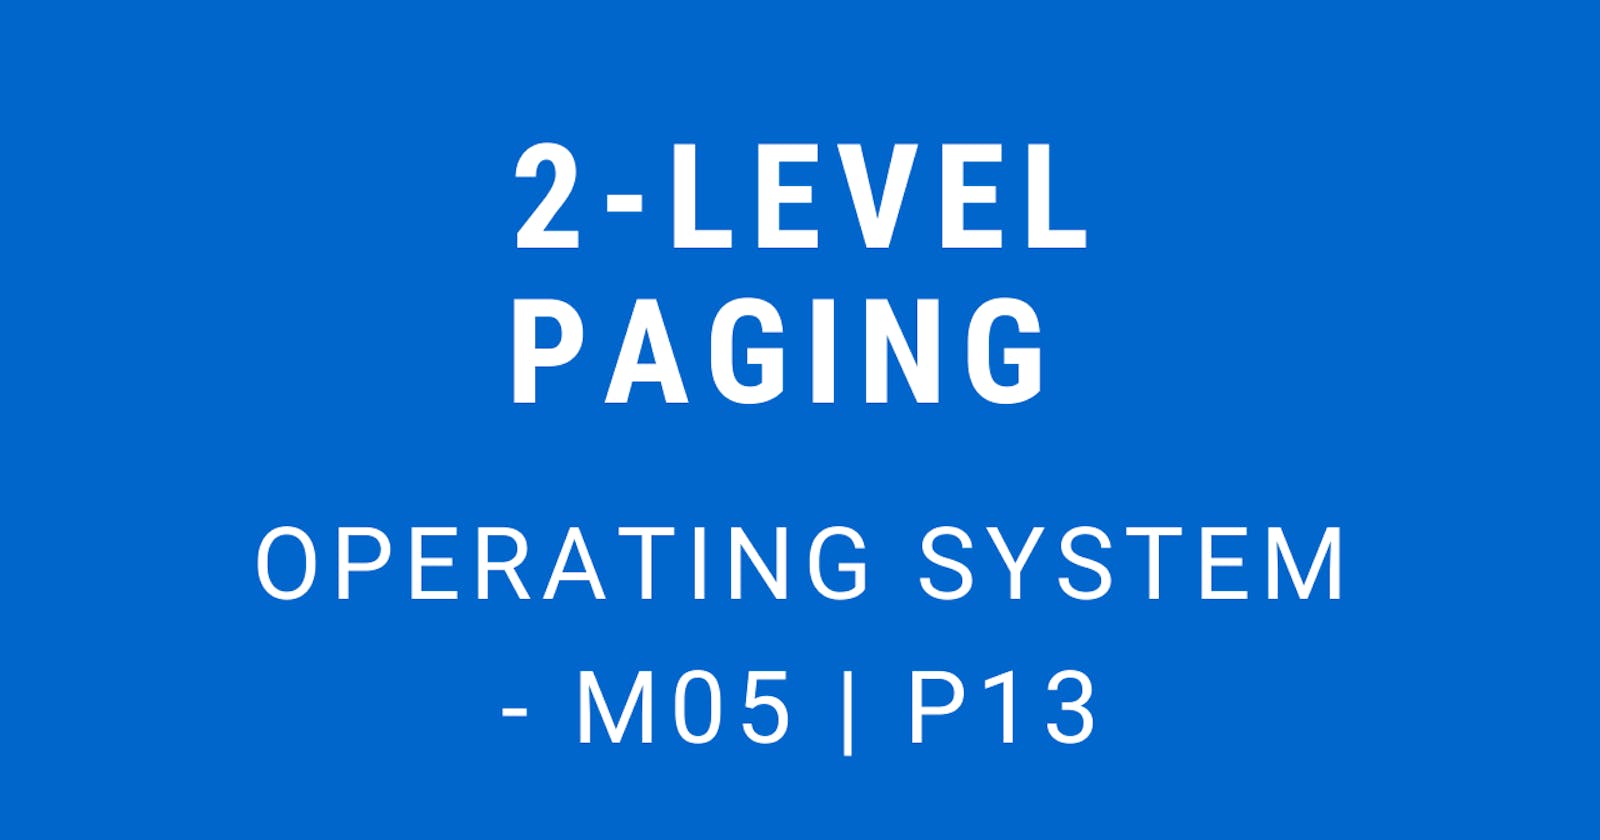 2-Level Paging | Operating System - M05 P13